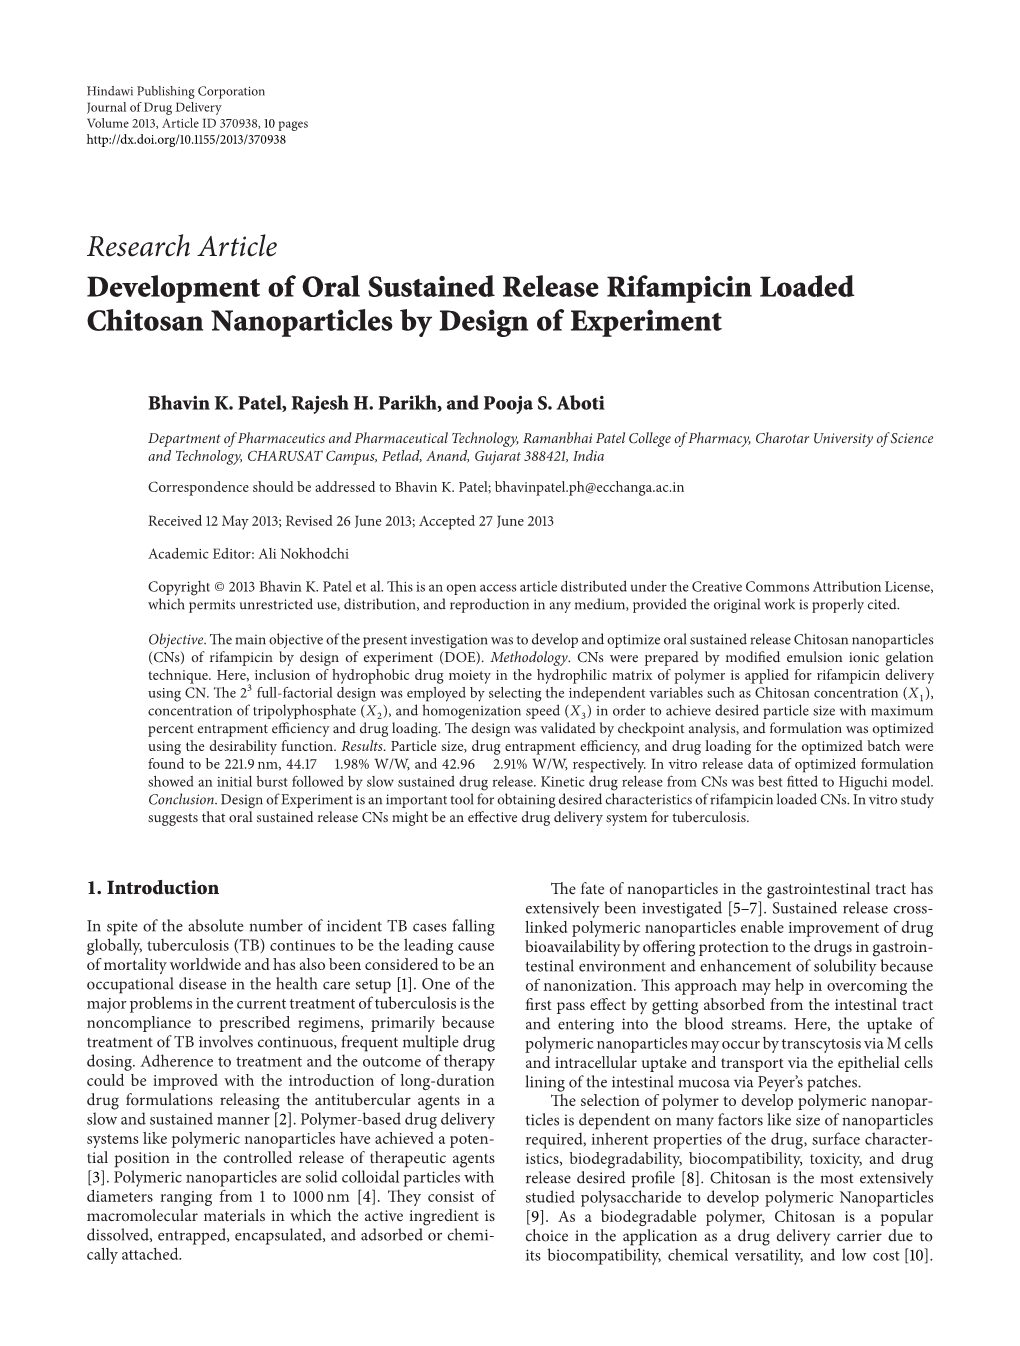 Development of Oral Sustained Release Rifampicin Loaded Chitosan Nanoparticles by Design of Experiment